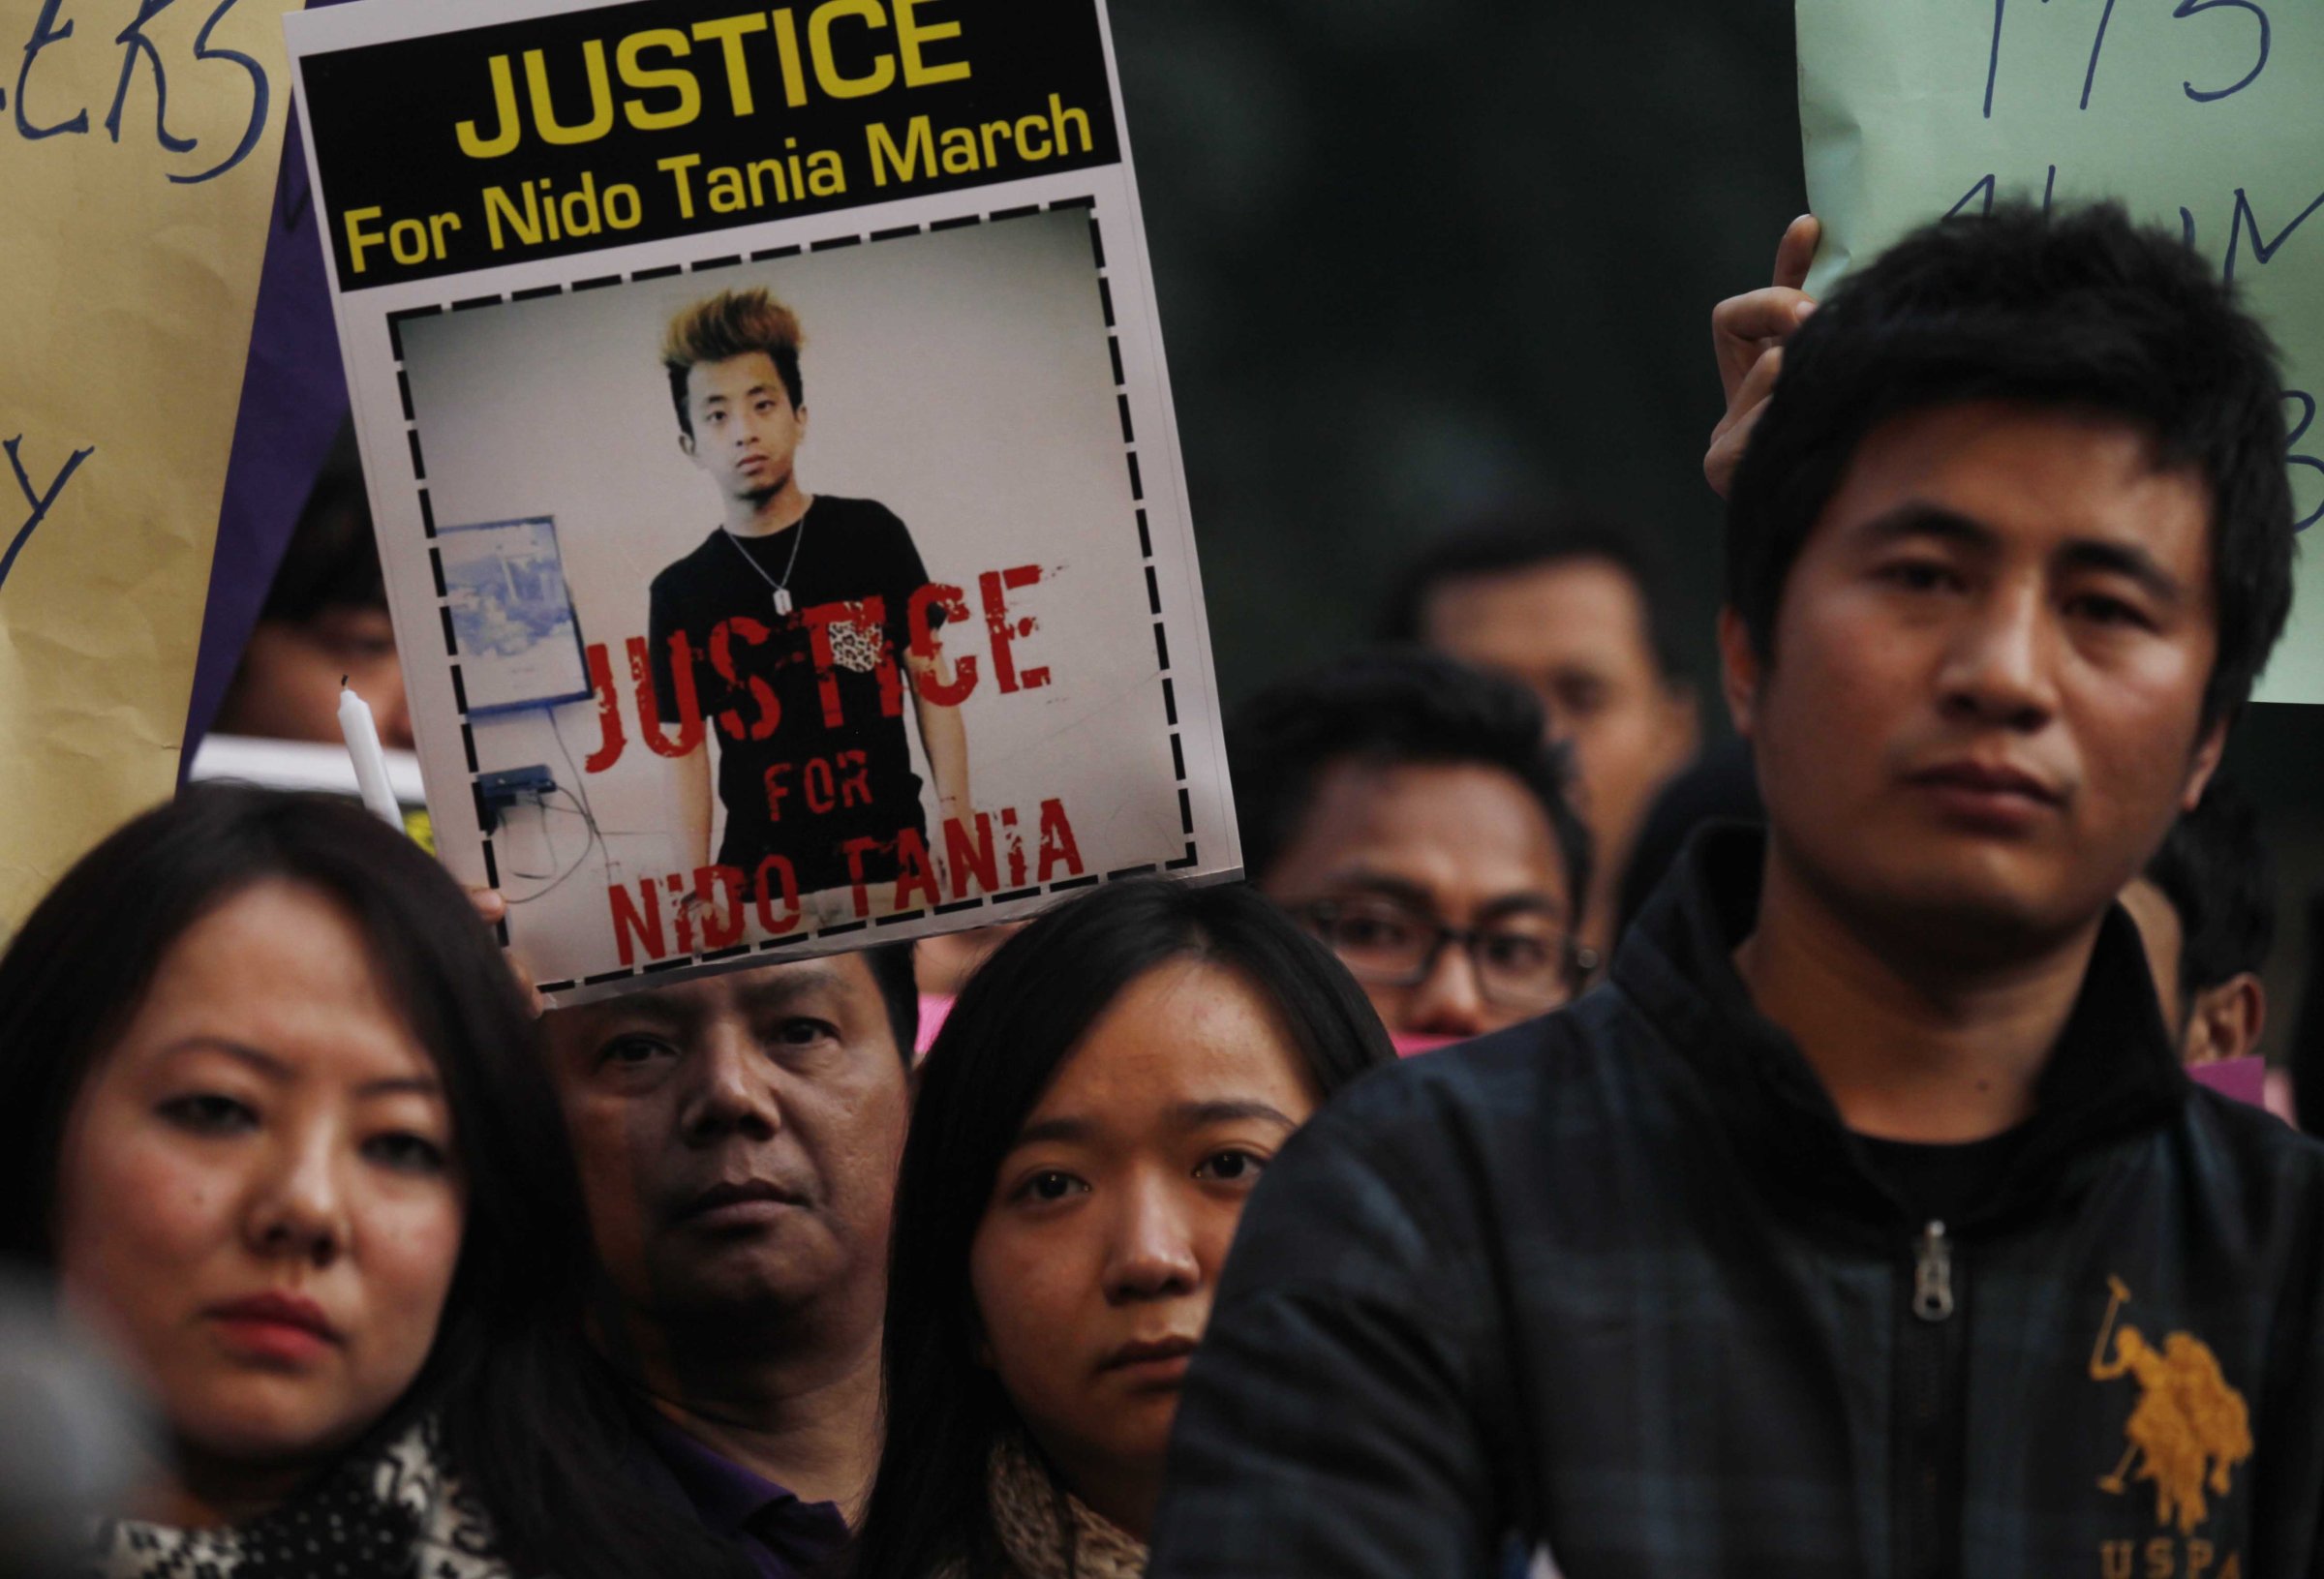 Indians from the northeastern states attend a vigil against racism and the beating and killing of student Nido Taniam, Feb. 2, 2014 in New Delhi.